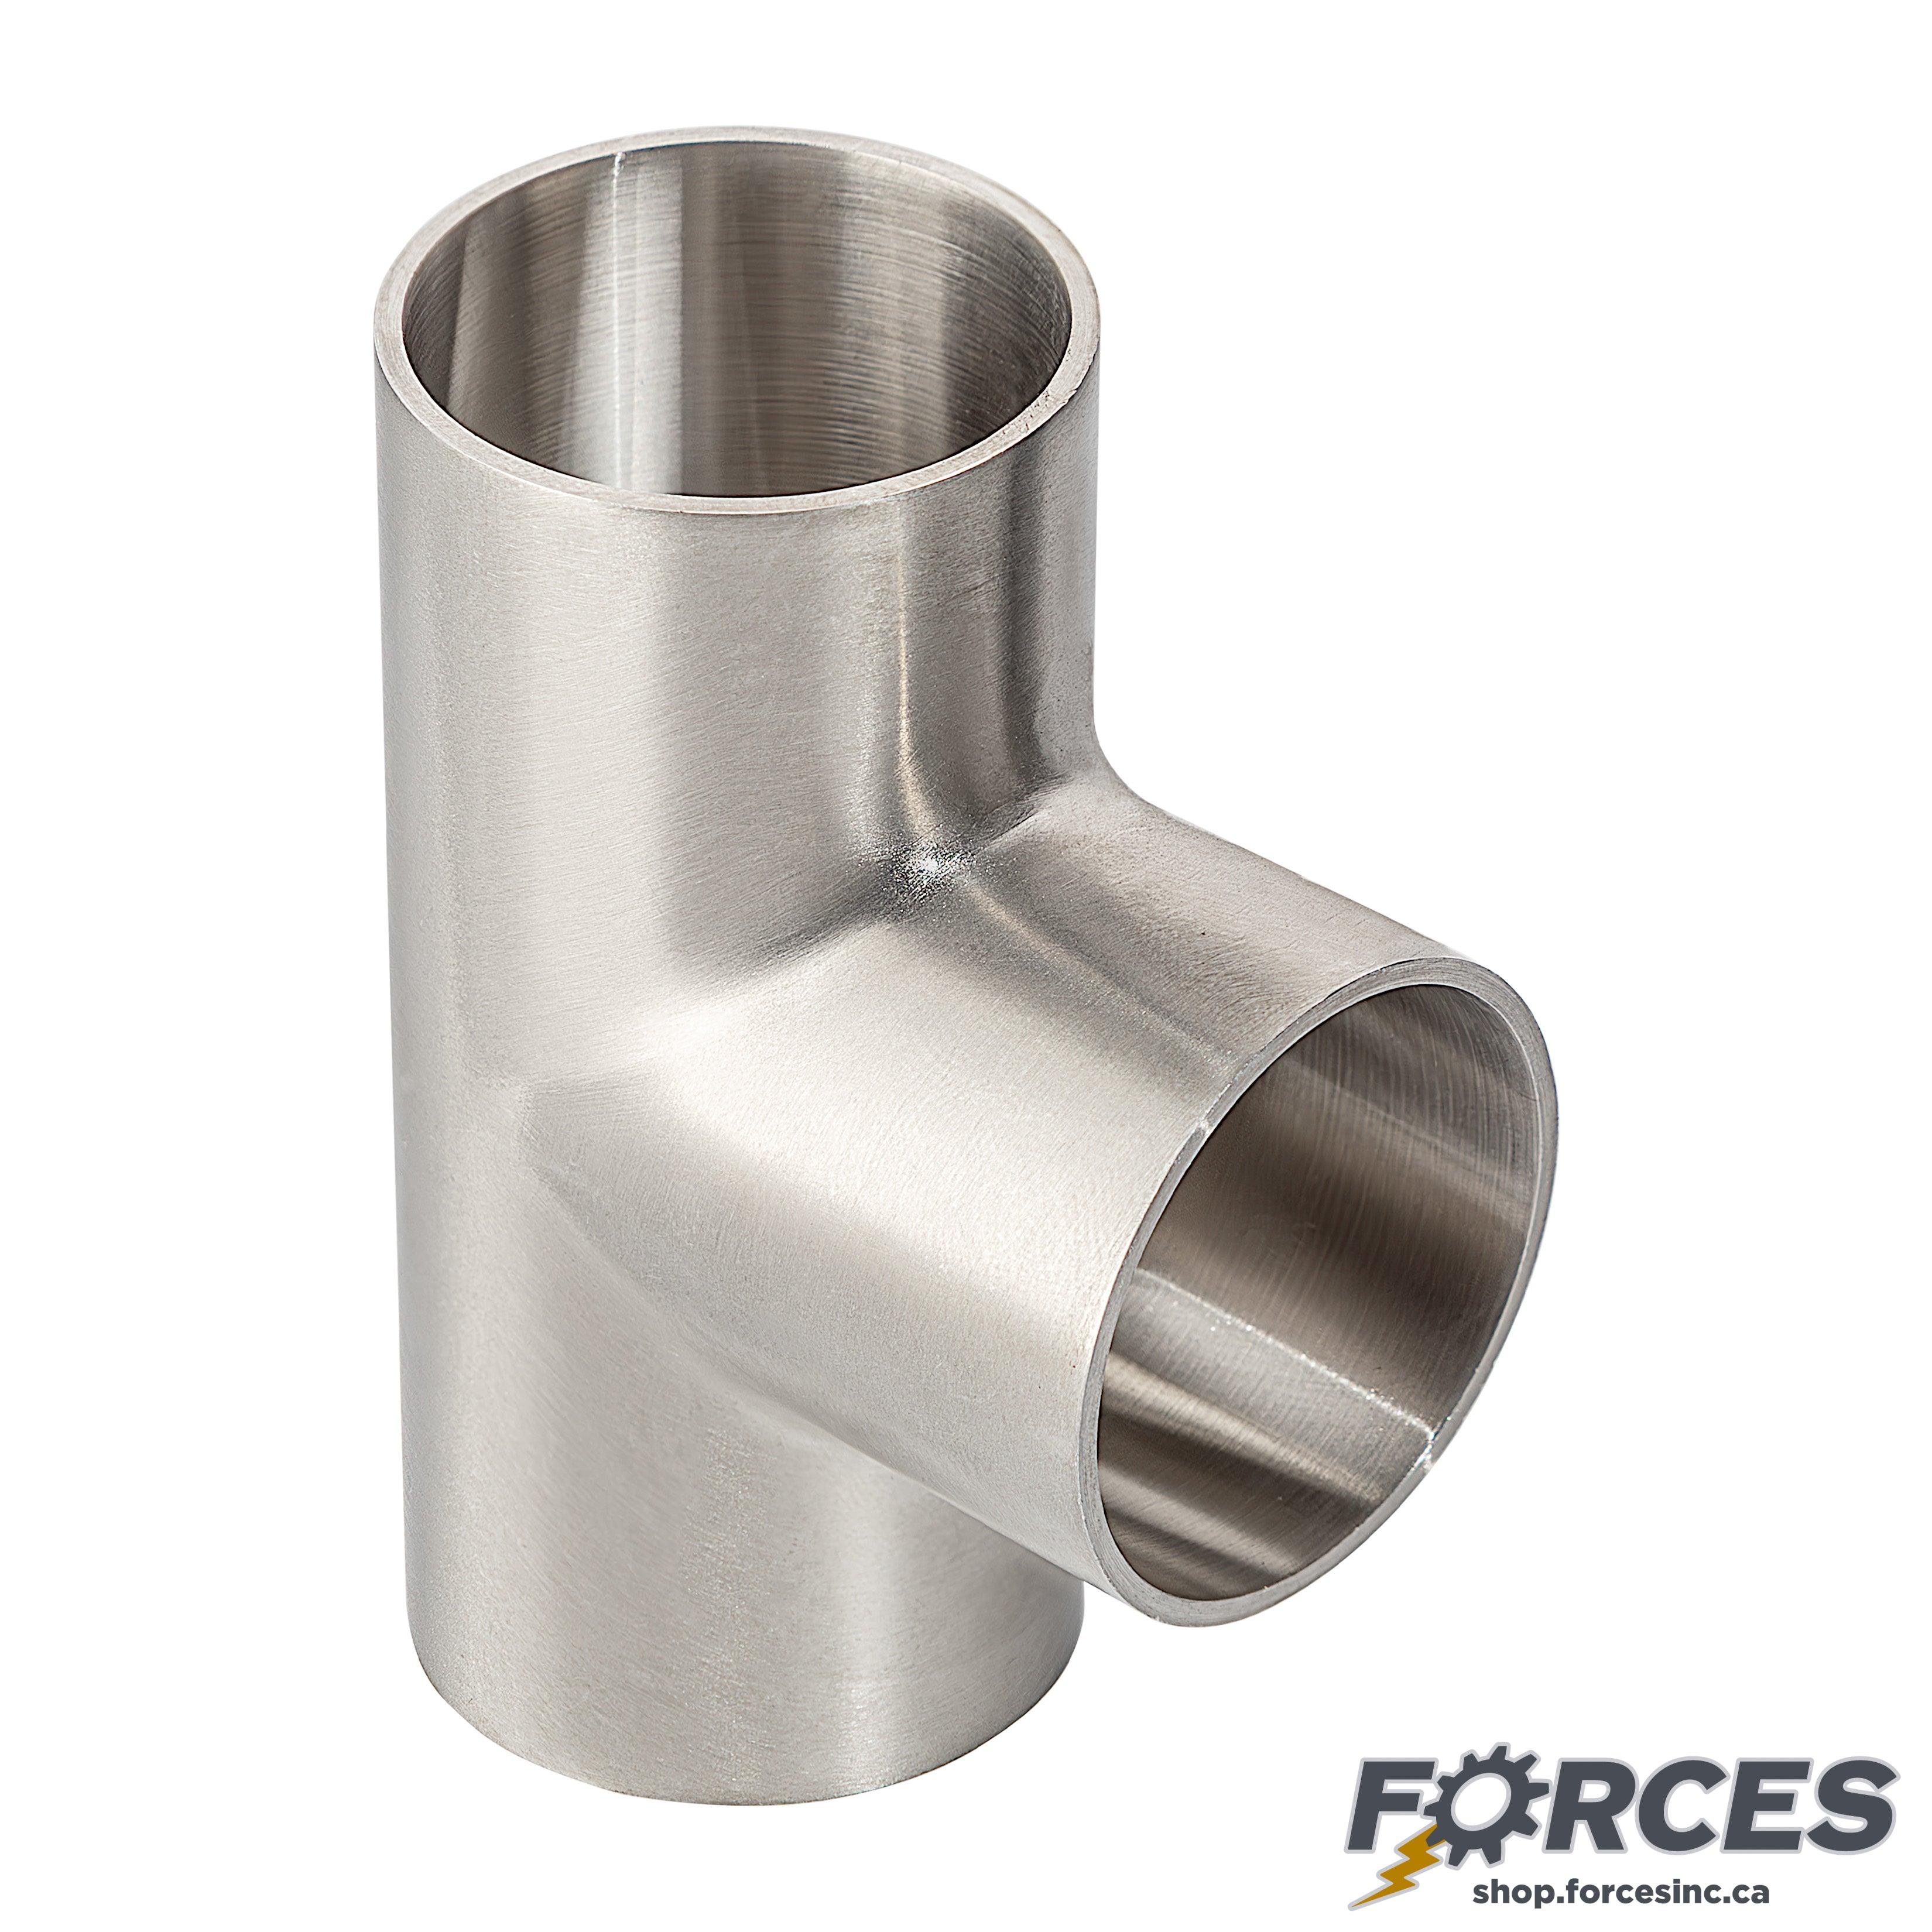 4" Butt Weld Short Tee - Stainless Steel 316 - Forces Inc